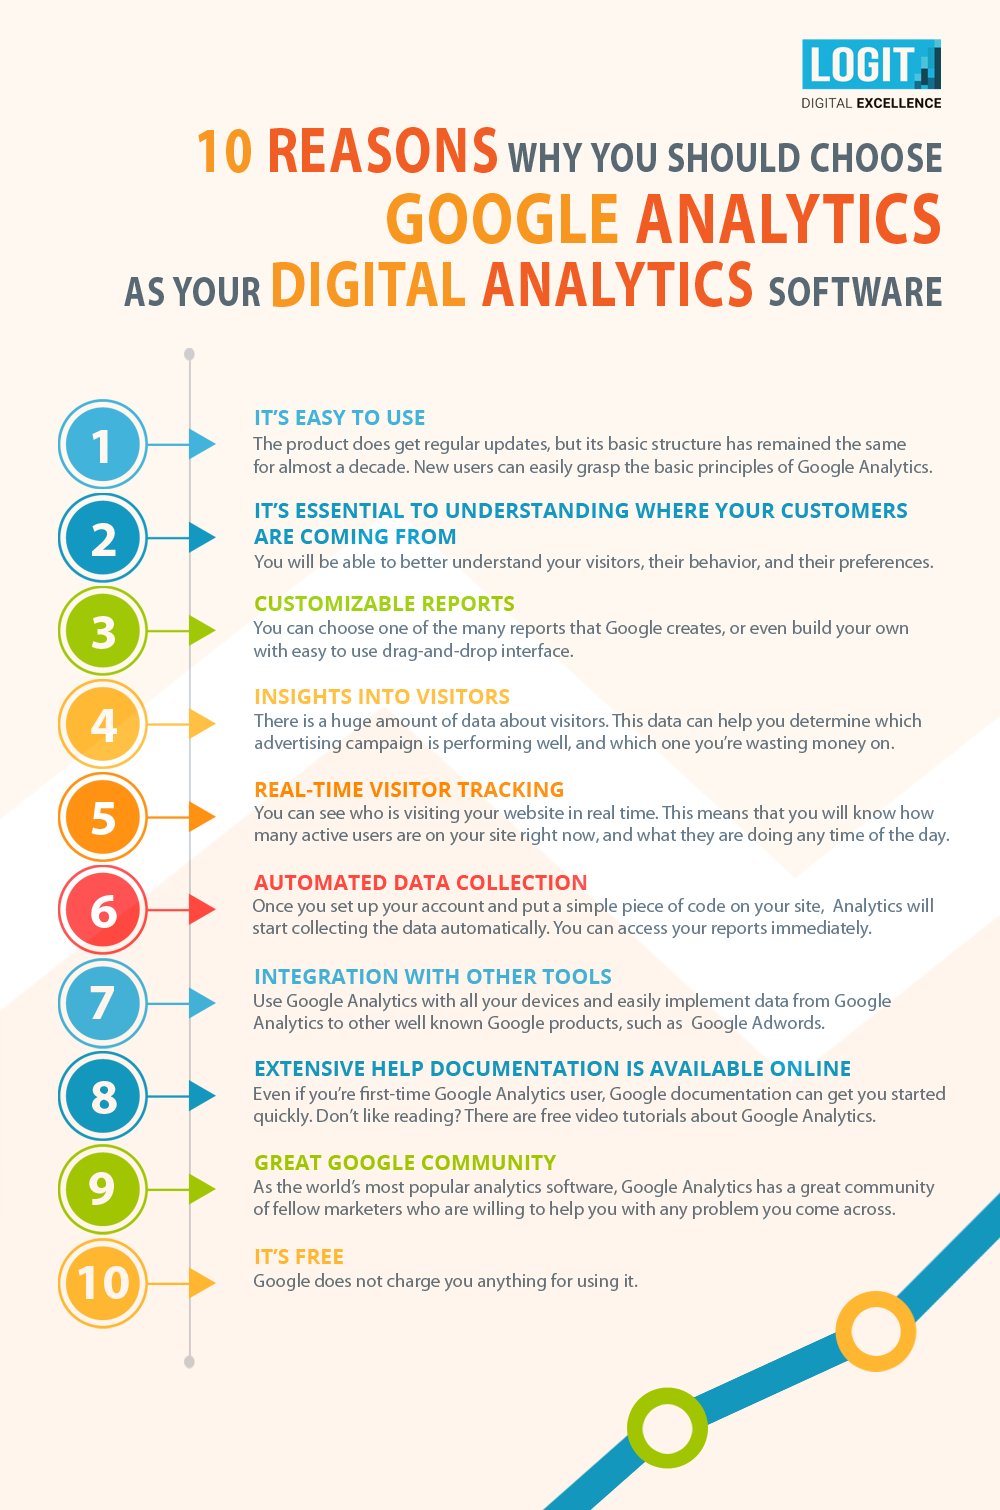 10 reasons to use Google Analytics as your digital analytics software - infographic by logit.hr